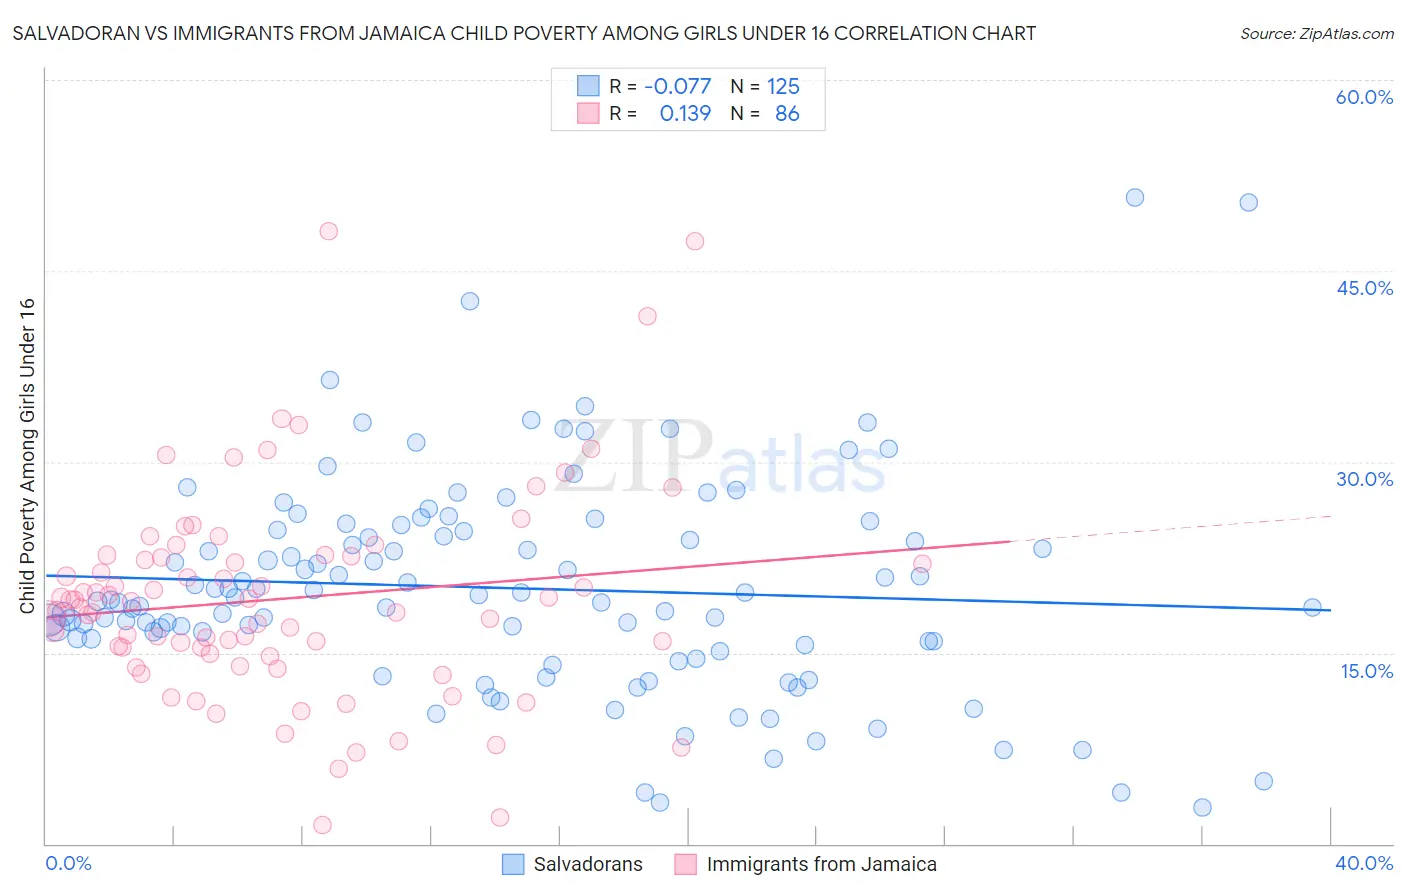 Salvadoran vs Immigrants from Jamaica Child Poverty Among Girls Under 16